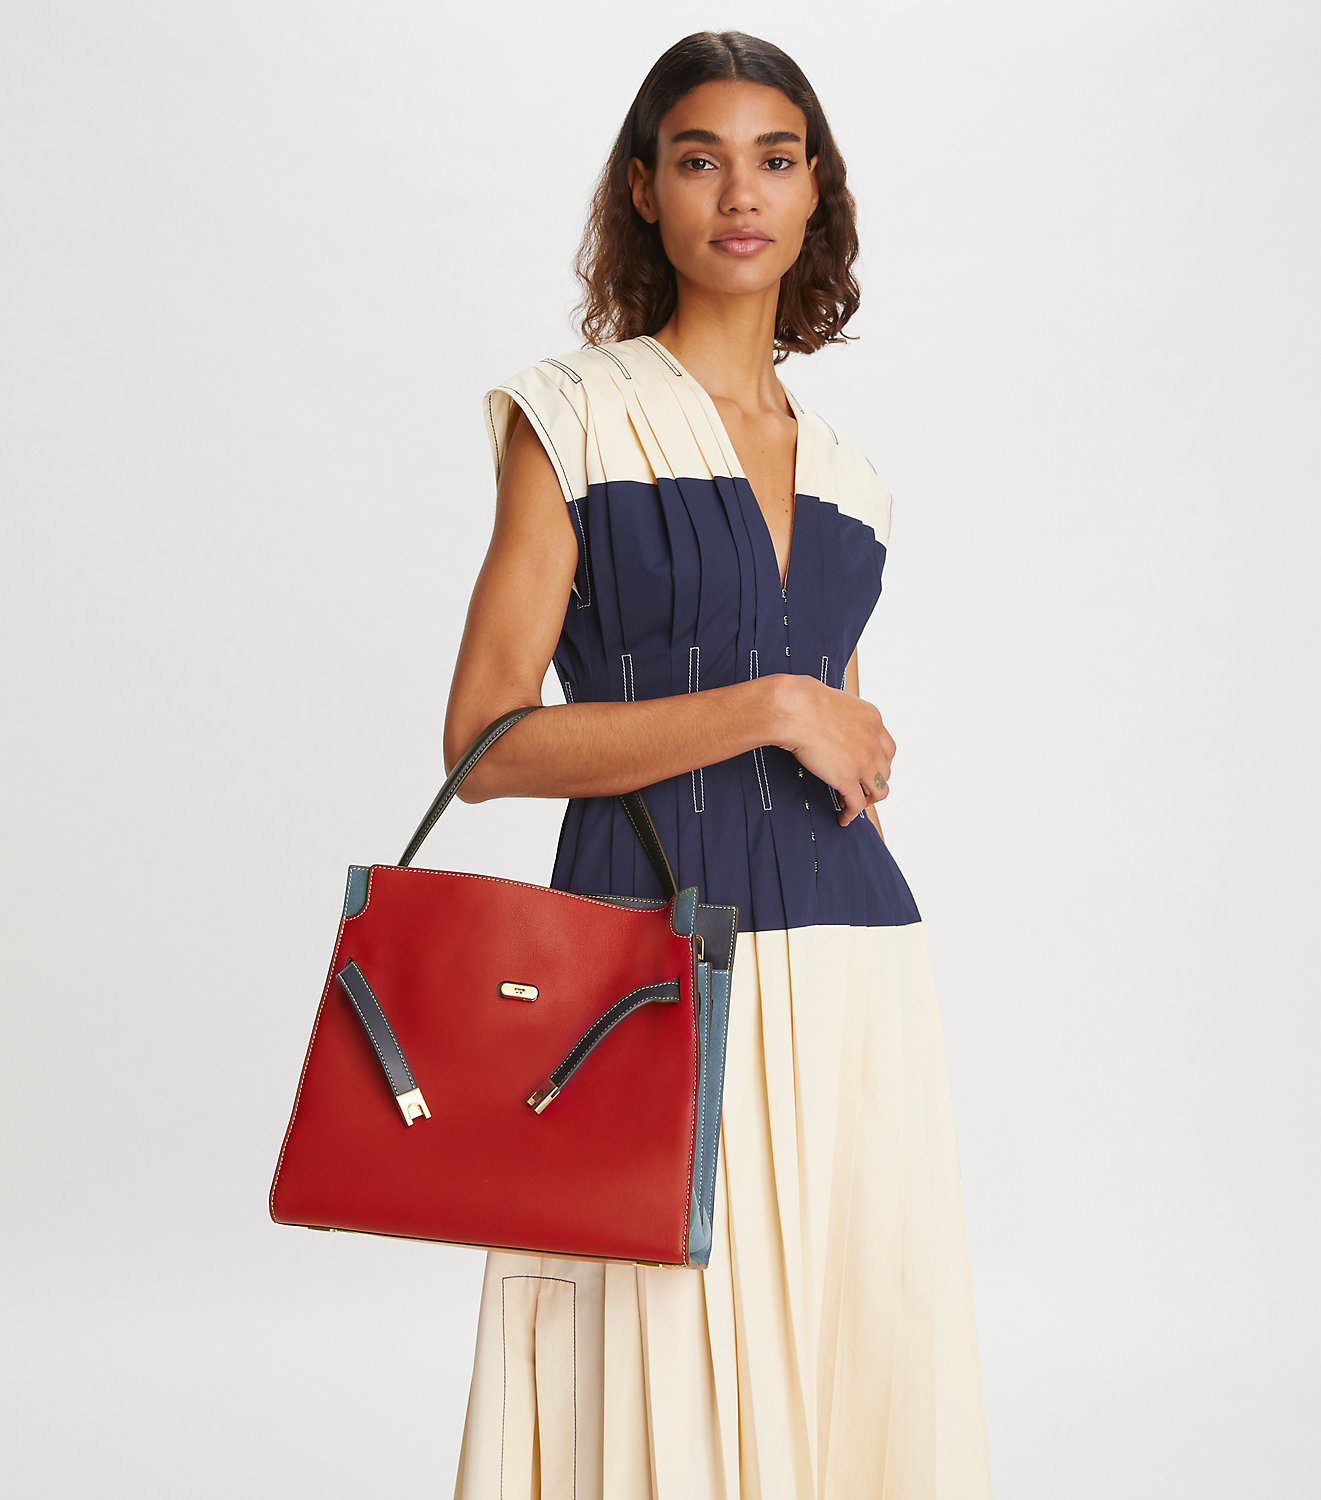 TORY BURCH TORY BURCH Lee Radziwill Double Bag RED APPLE